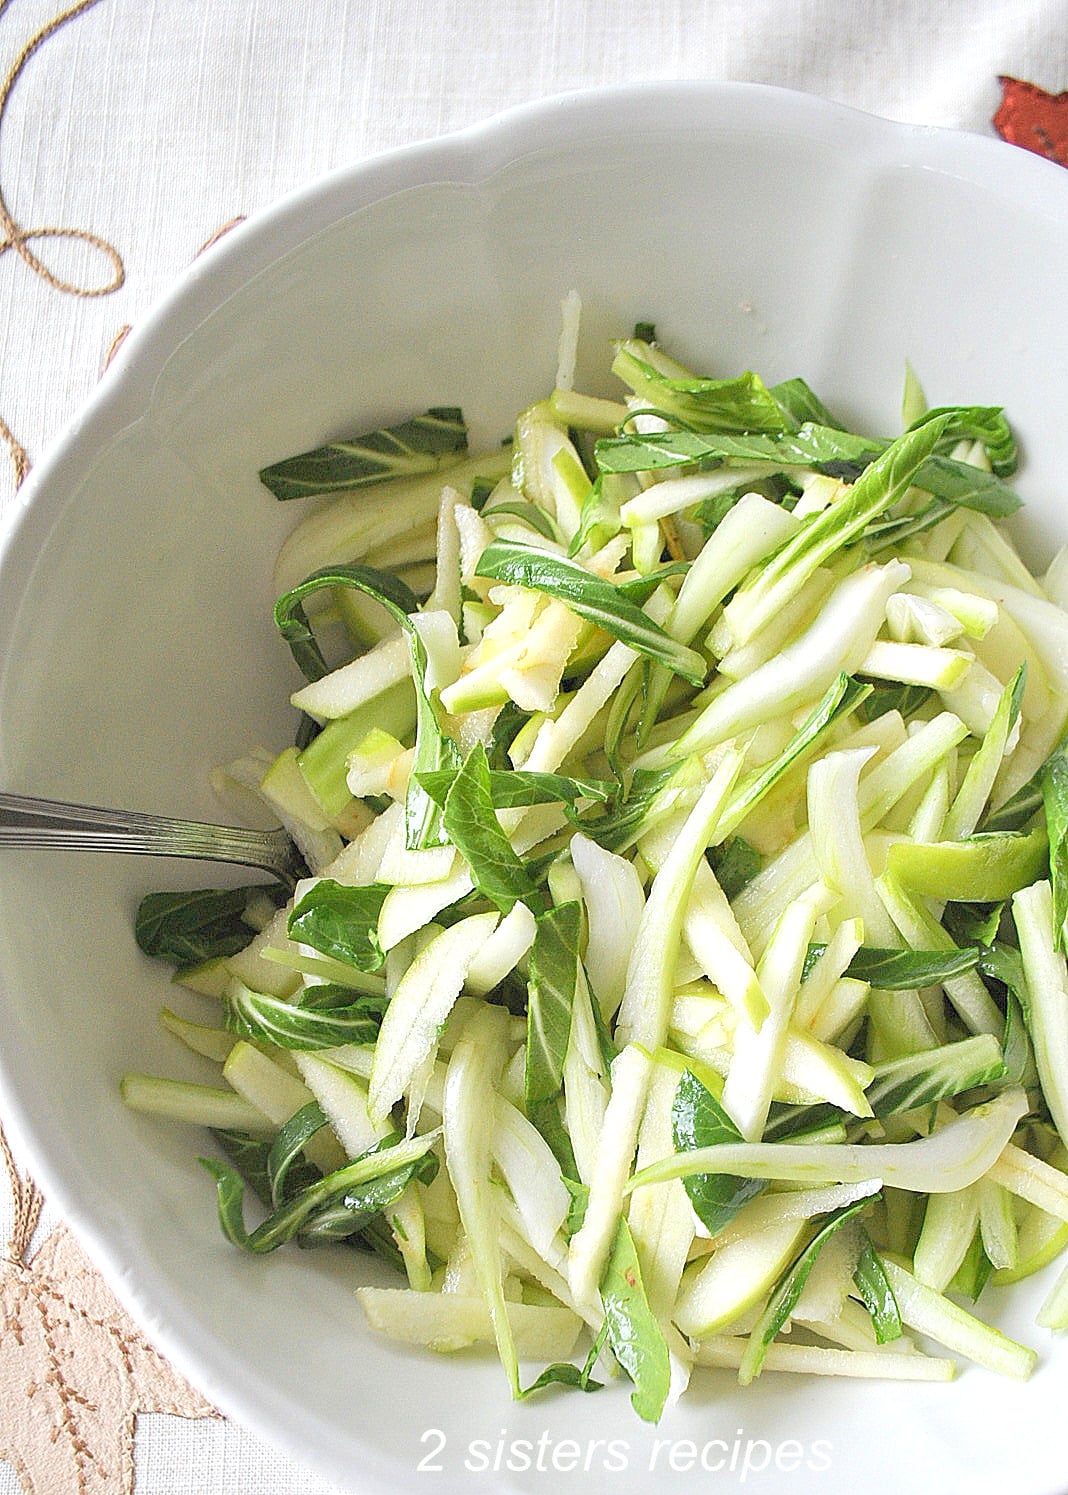 Thinly slice bok choy. From 2 sisters recipes